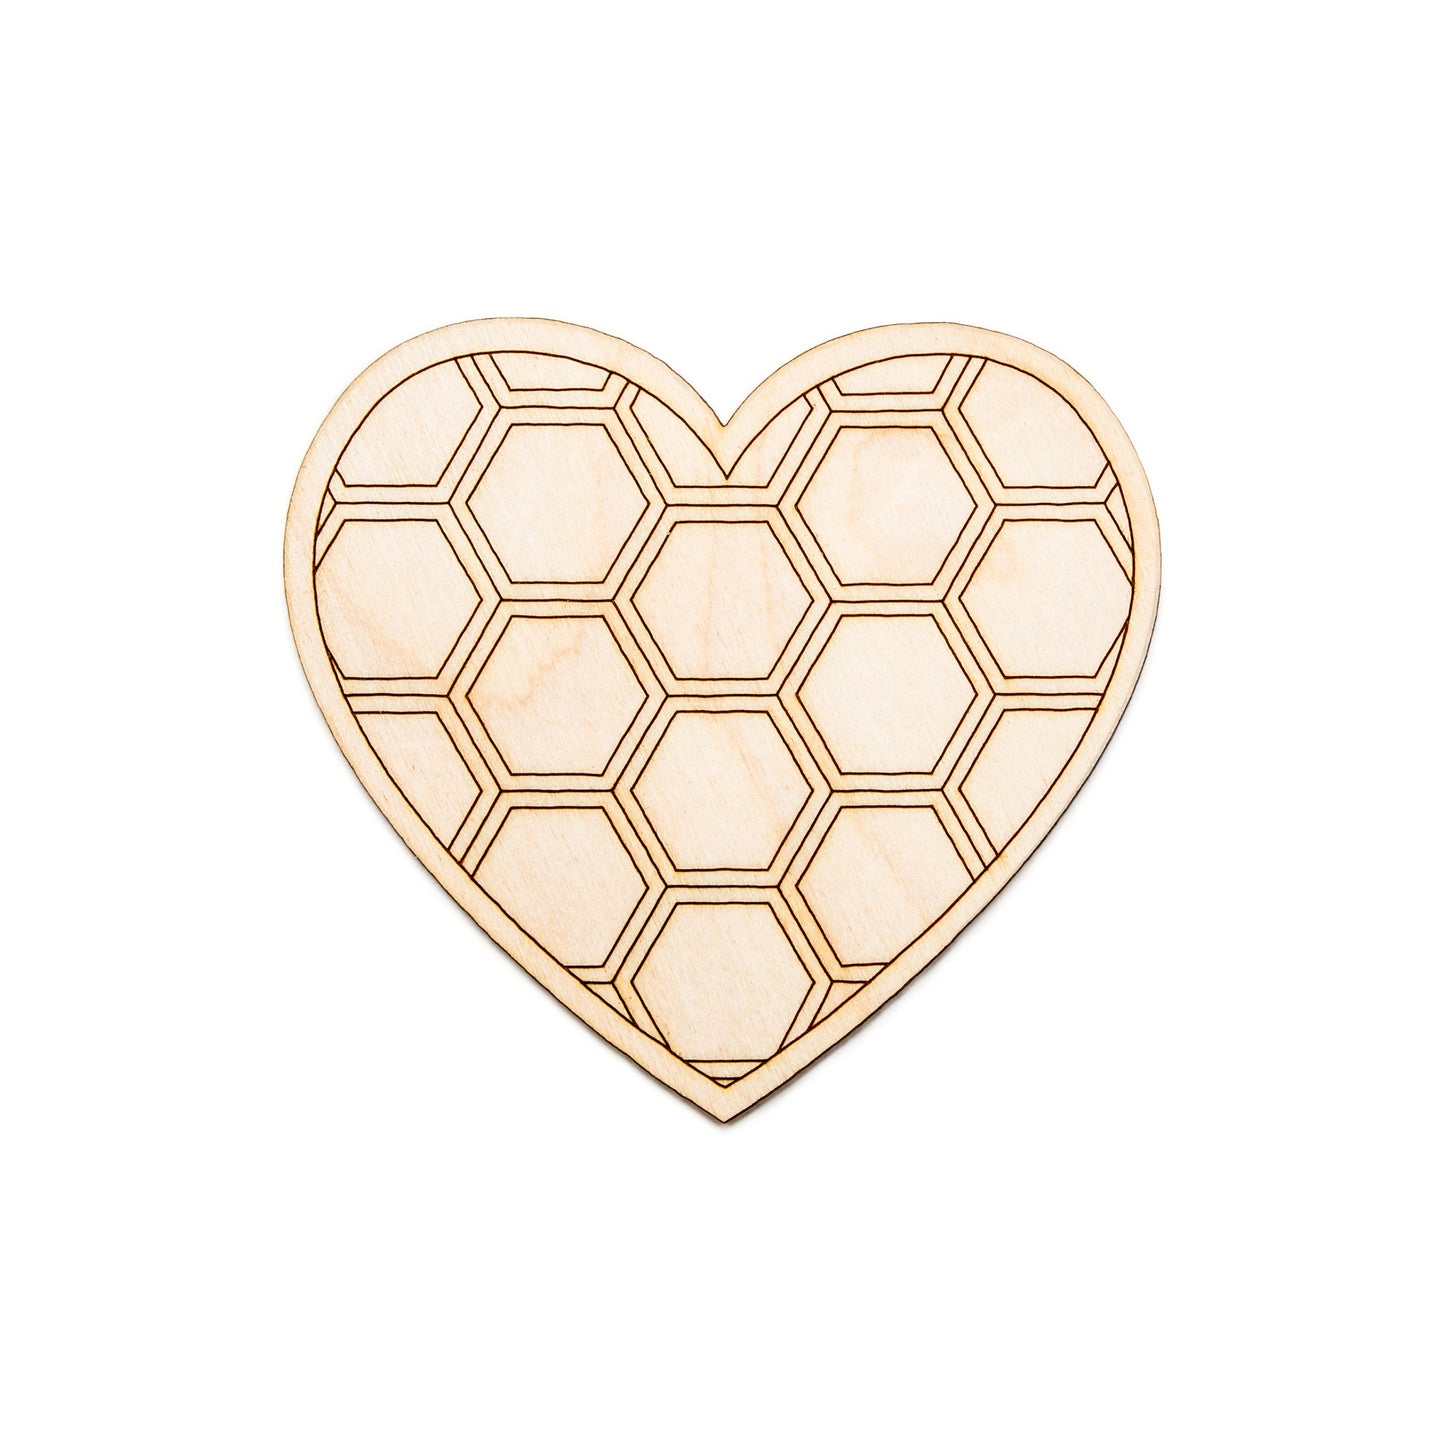 Honeycomb Heart-Solid-Wood Cutout-Honeycomb Theme Decor-Various Sizes-Solid Line Etch Design-Honey Heart-Bee Theme Wood Decor-Hearts Decor